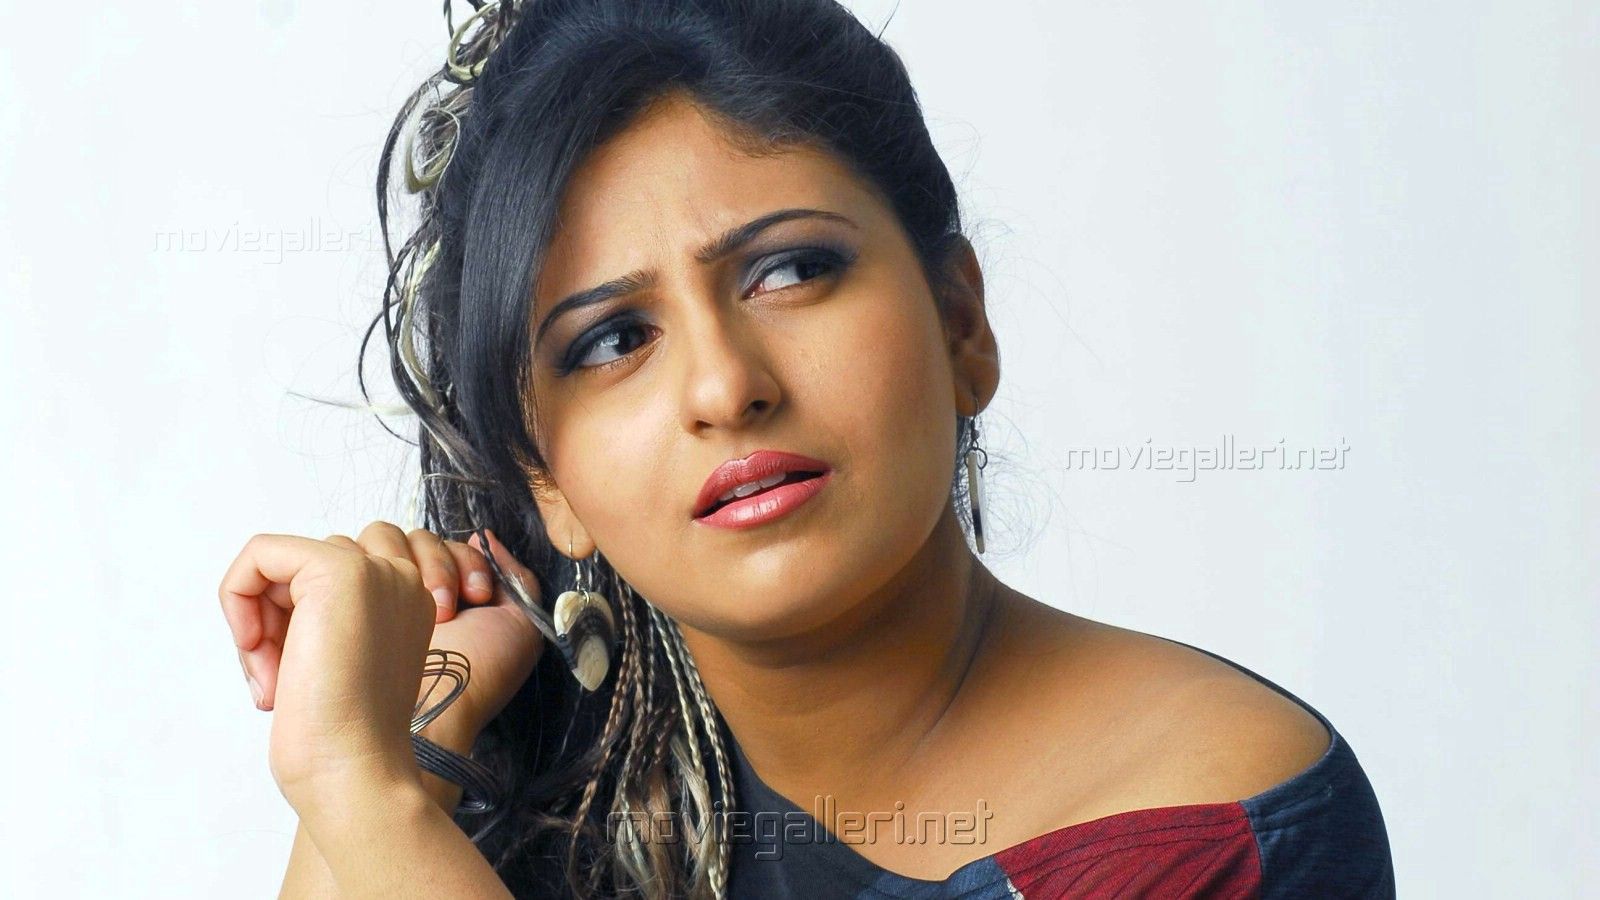 Tamil Actresses Wallpapers Group (65+)